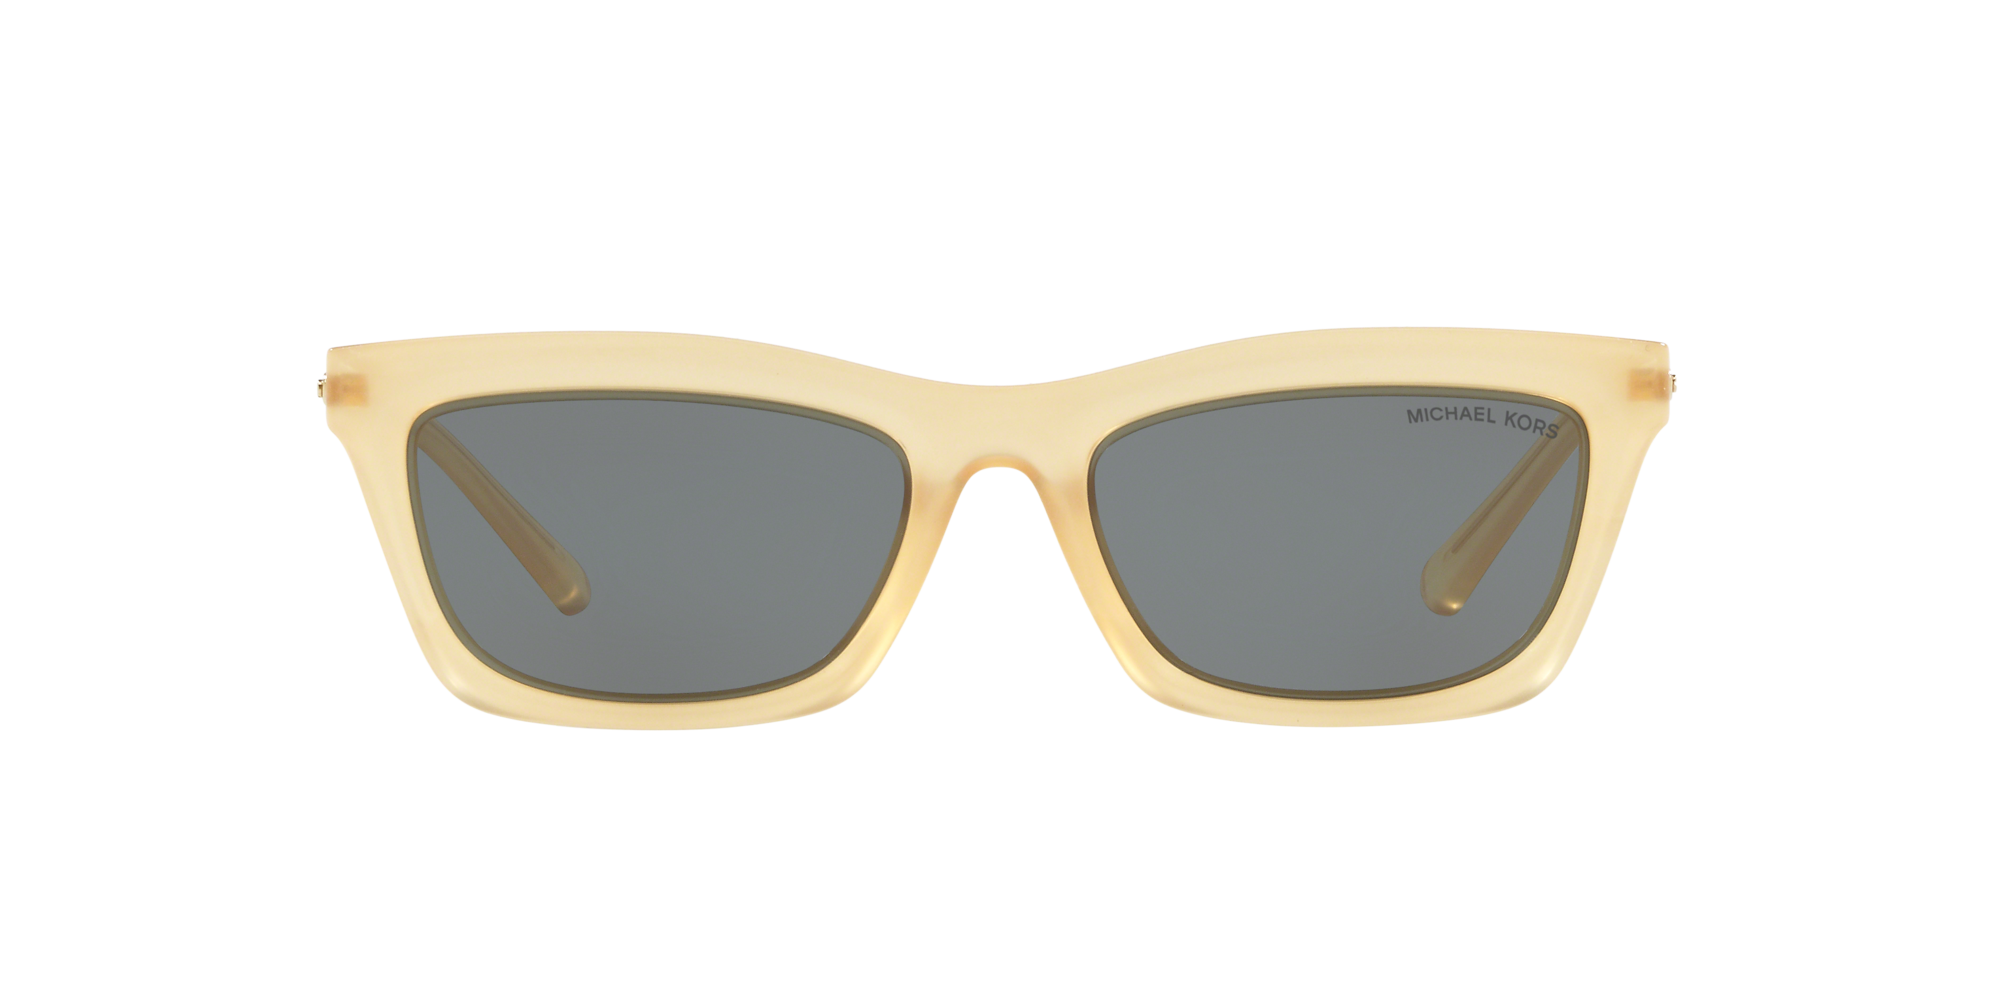 Michael Kors Stowe Sunglasses  Yellow in Delhi at best price by Sunglass  Hut Pacific Mall  Justdial